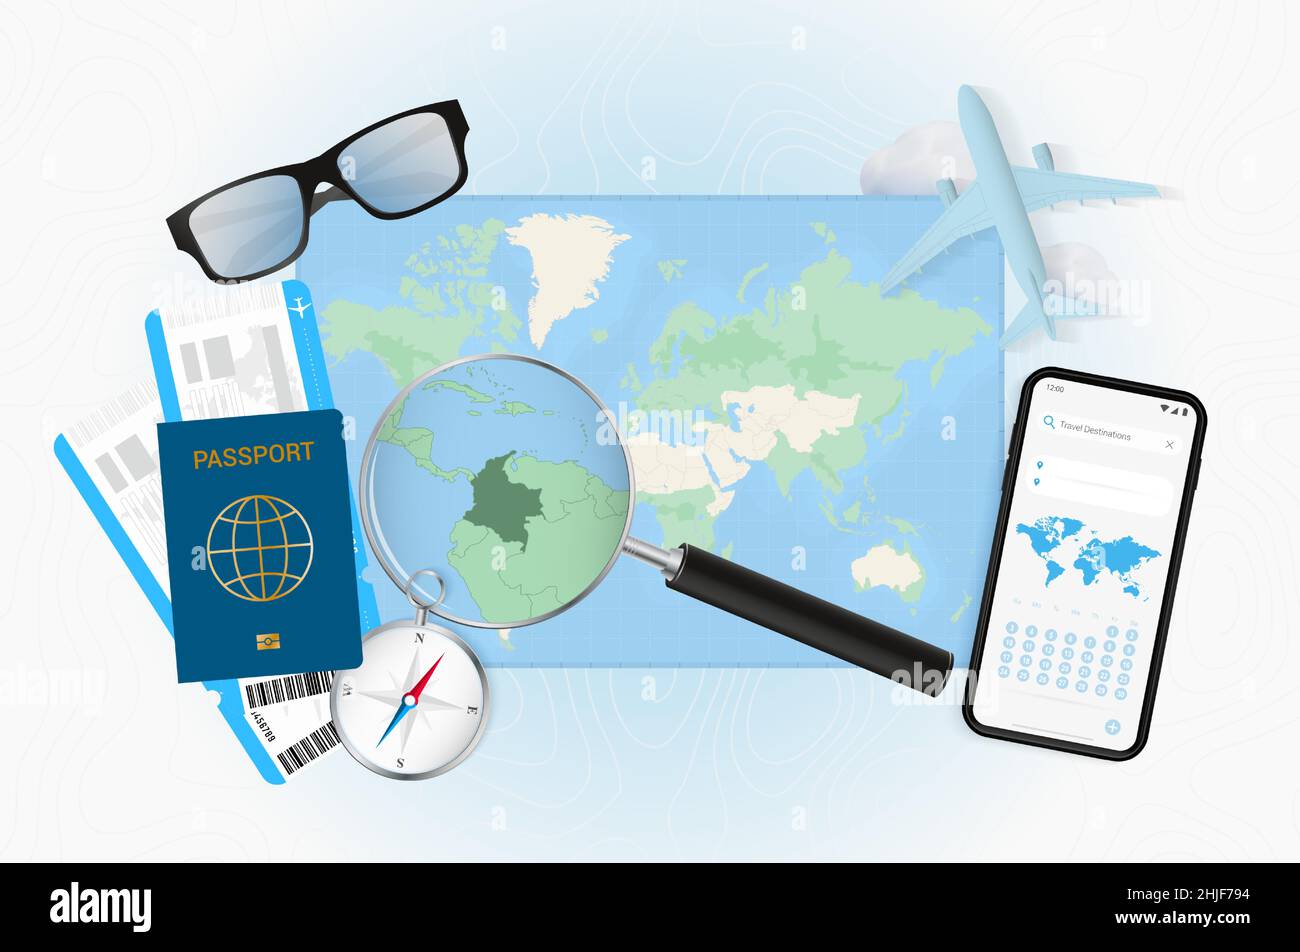 Conceptual illustration of a trip to Colombia with travel gear. World map with compass, passport, tickets, cell phone, plane and glass. Stock Vector